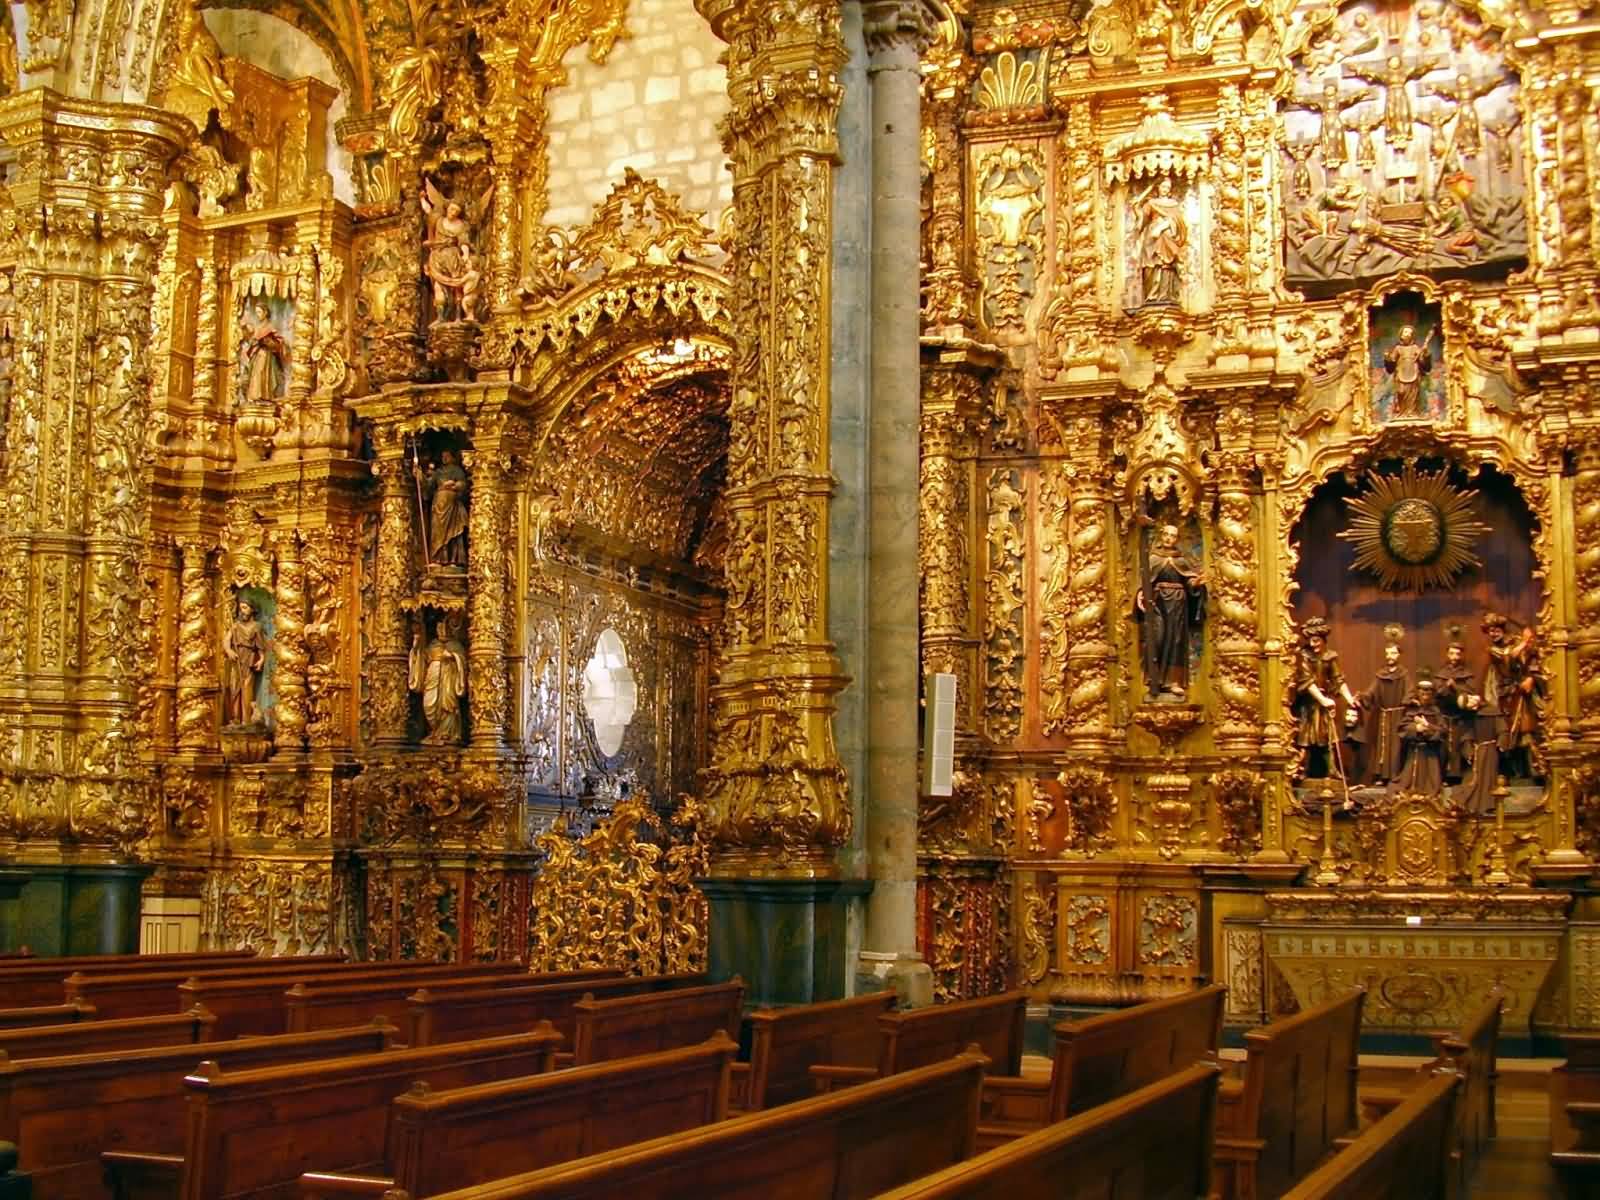 Beautiful Golden Carvings Decoration Inside Church of Sao Francisco